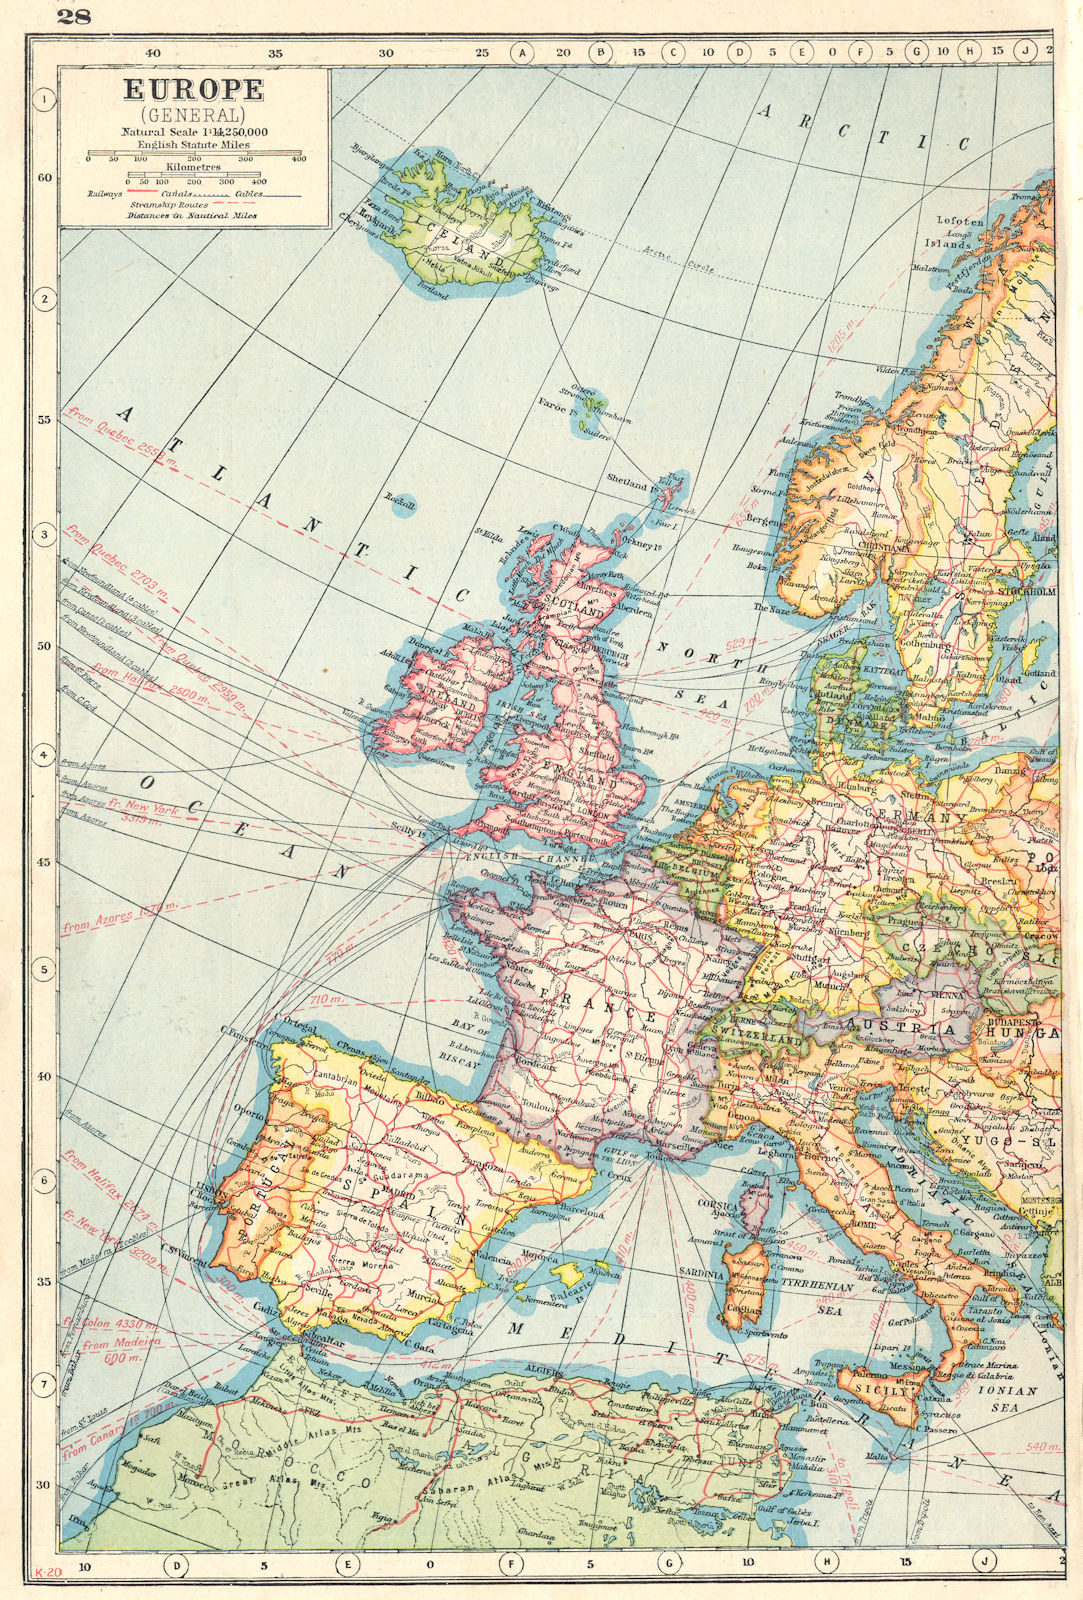 WESTERN EUROPE. Showing railways cables steamship routes. HARMSWORTH 1920 map